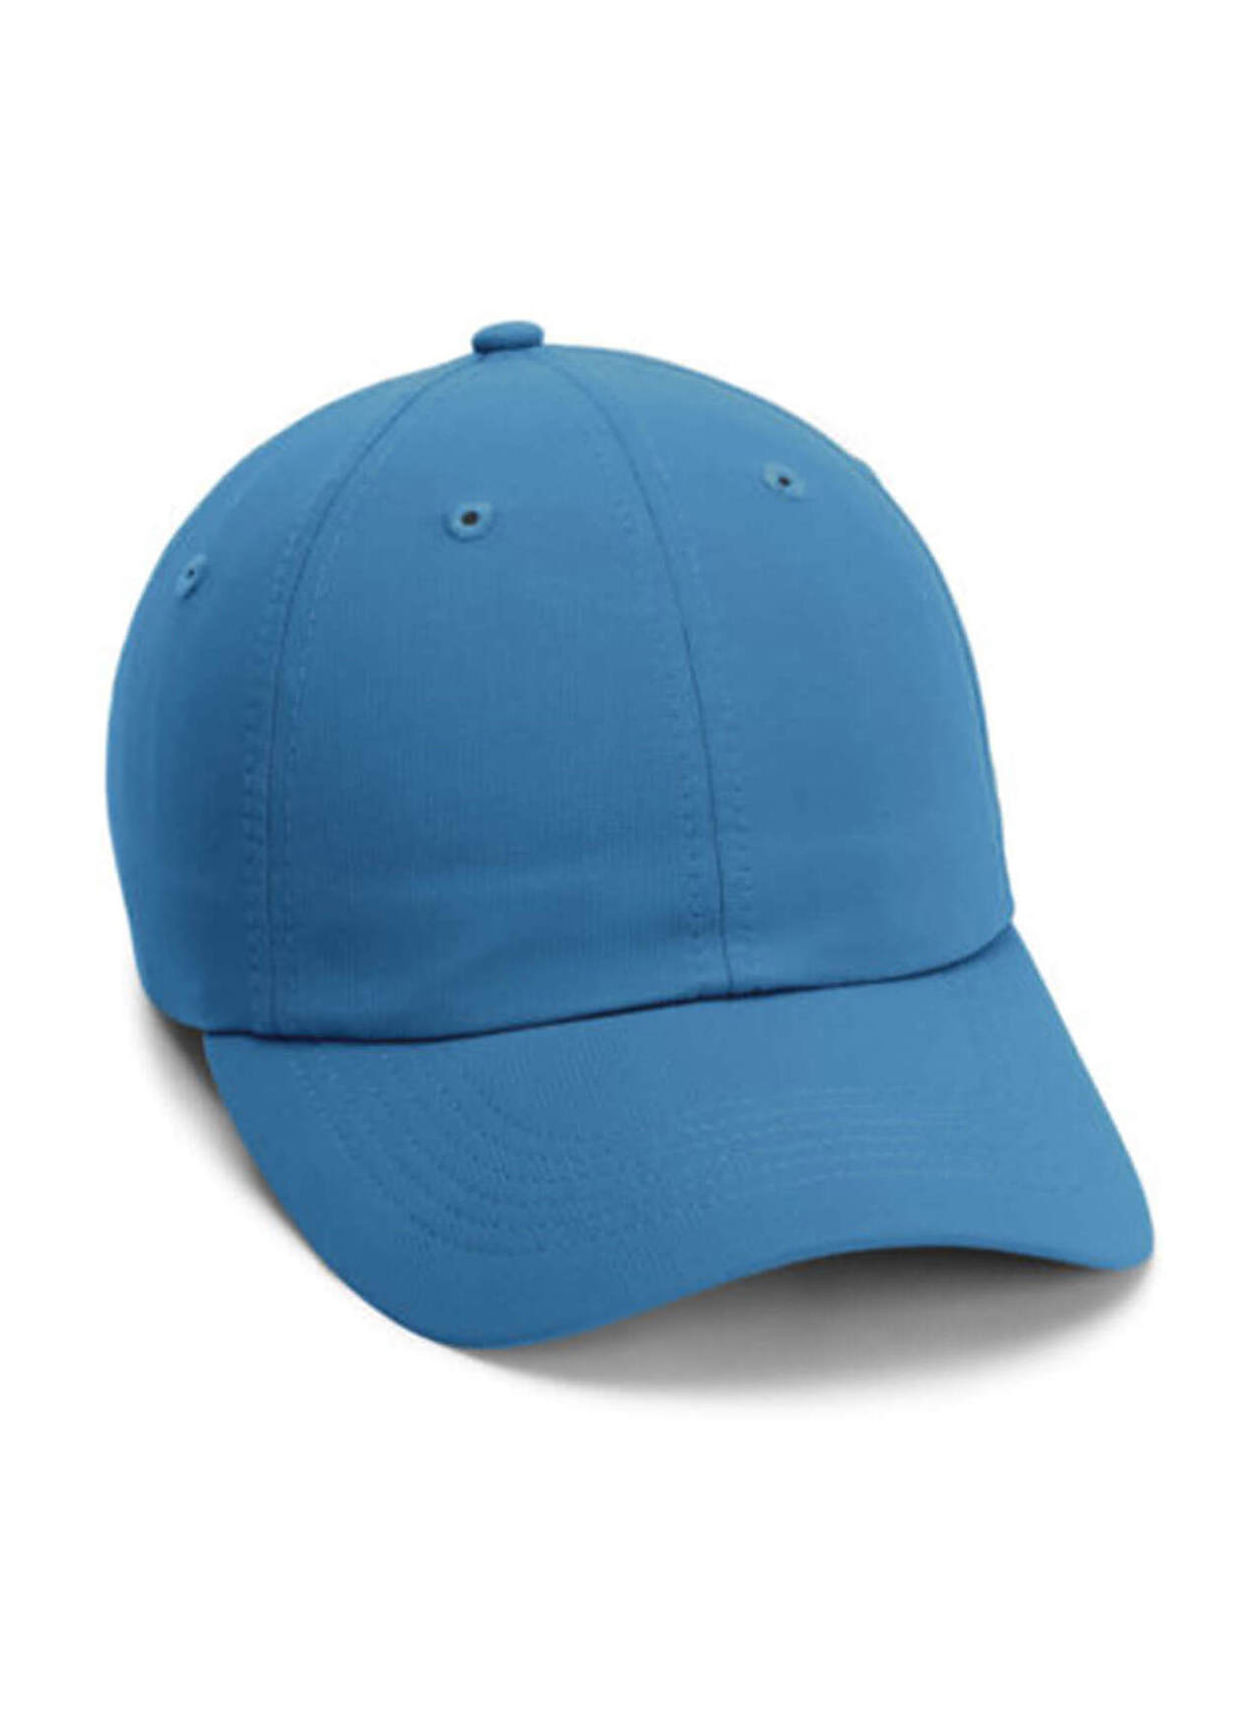 Imperial Seaglass Original Small Fit Performance Hat